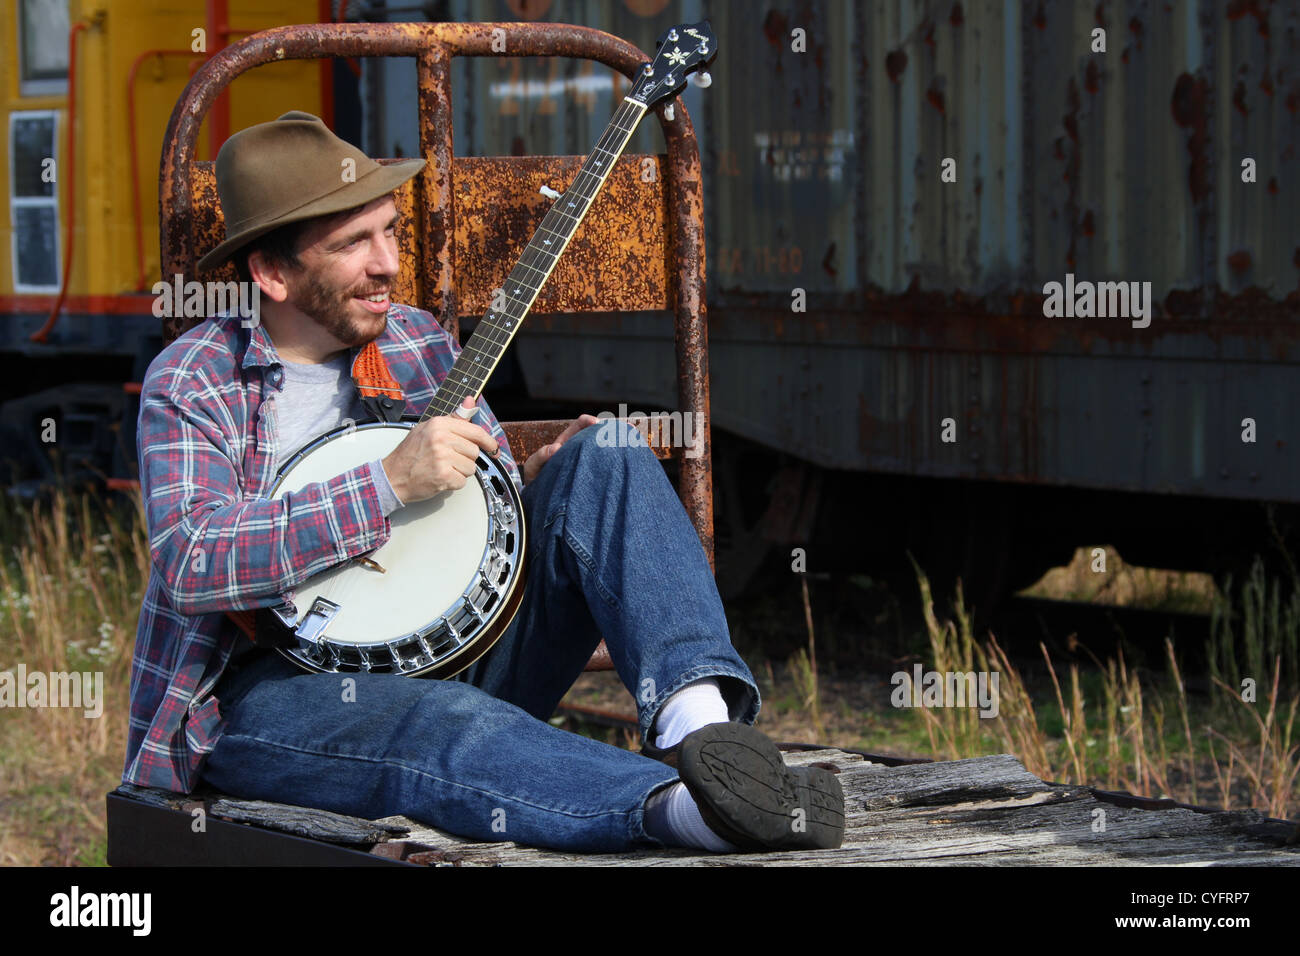 Male model as a hobo playing banjo while sitting on an old railroad baggage cart. Stock Photo